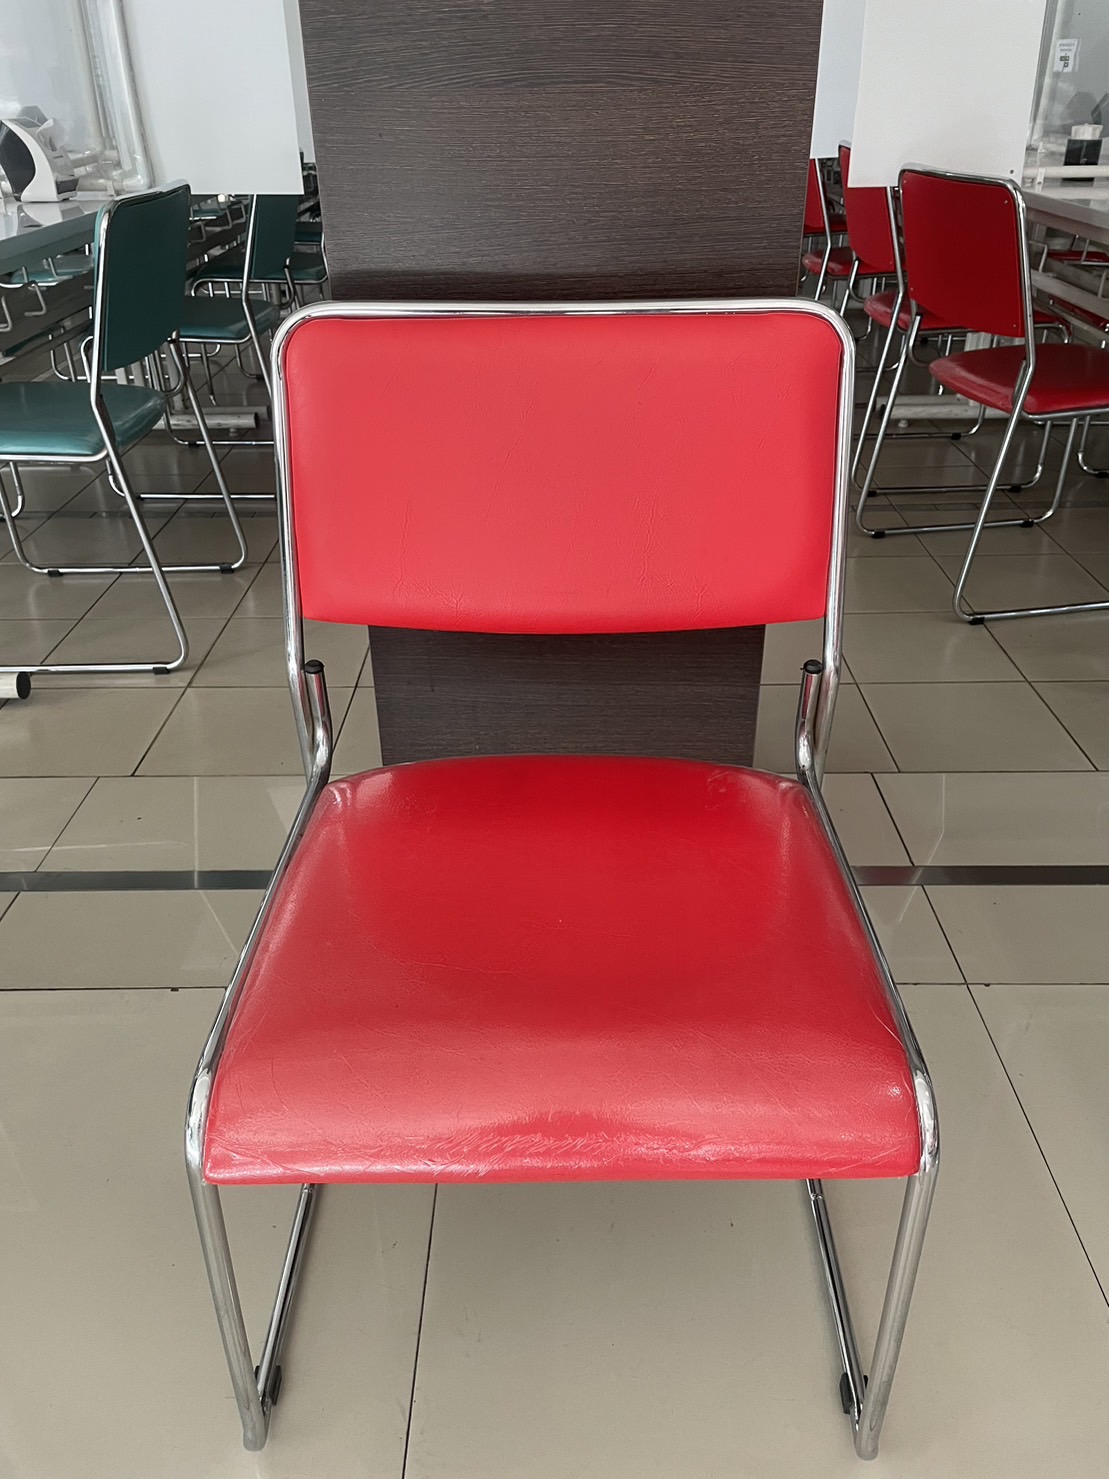 58022::VC-830::A VC modern chair with PVC leather/mesh fabric seat and chrome base. Dimension (WxDxH) cm : 46x53x78 